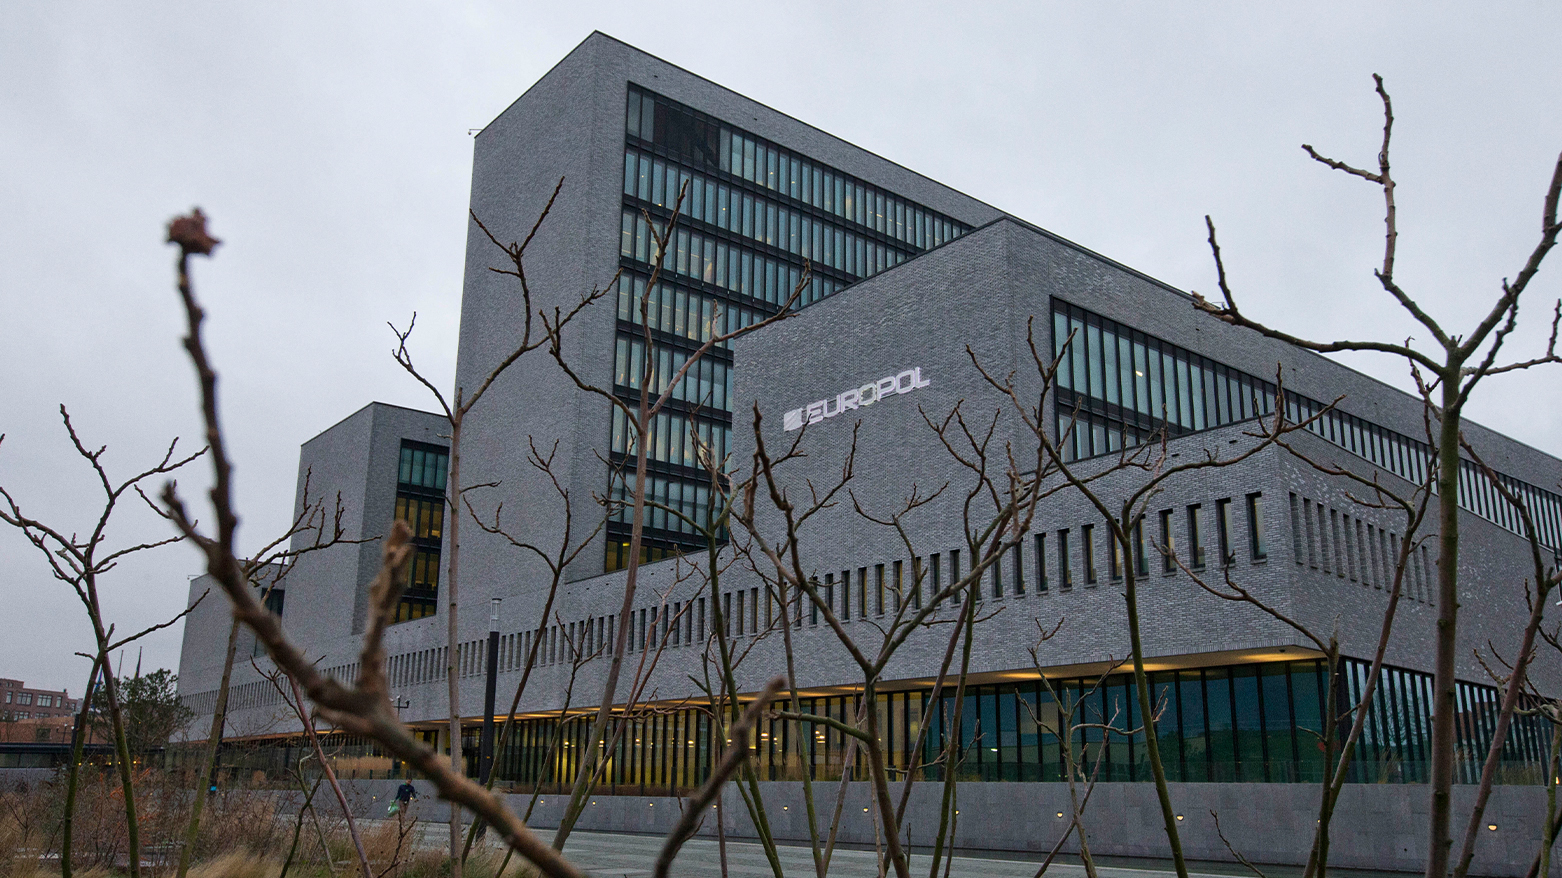 The headquarters of Europol are seen in this photo in The Hague, Netherlands. (Photo: AP)